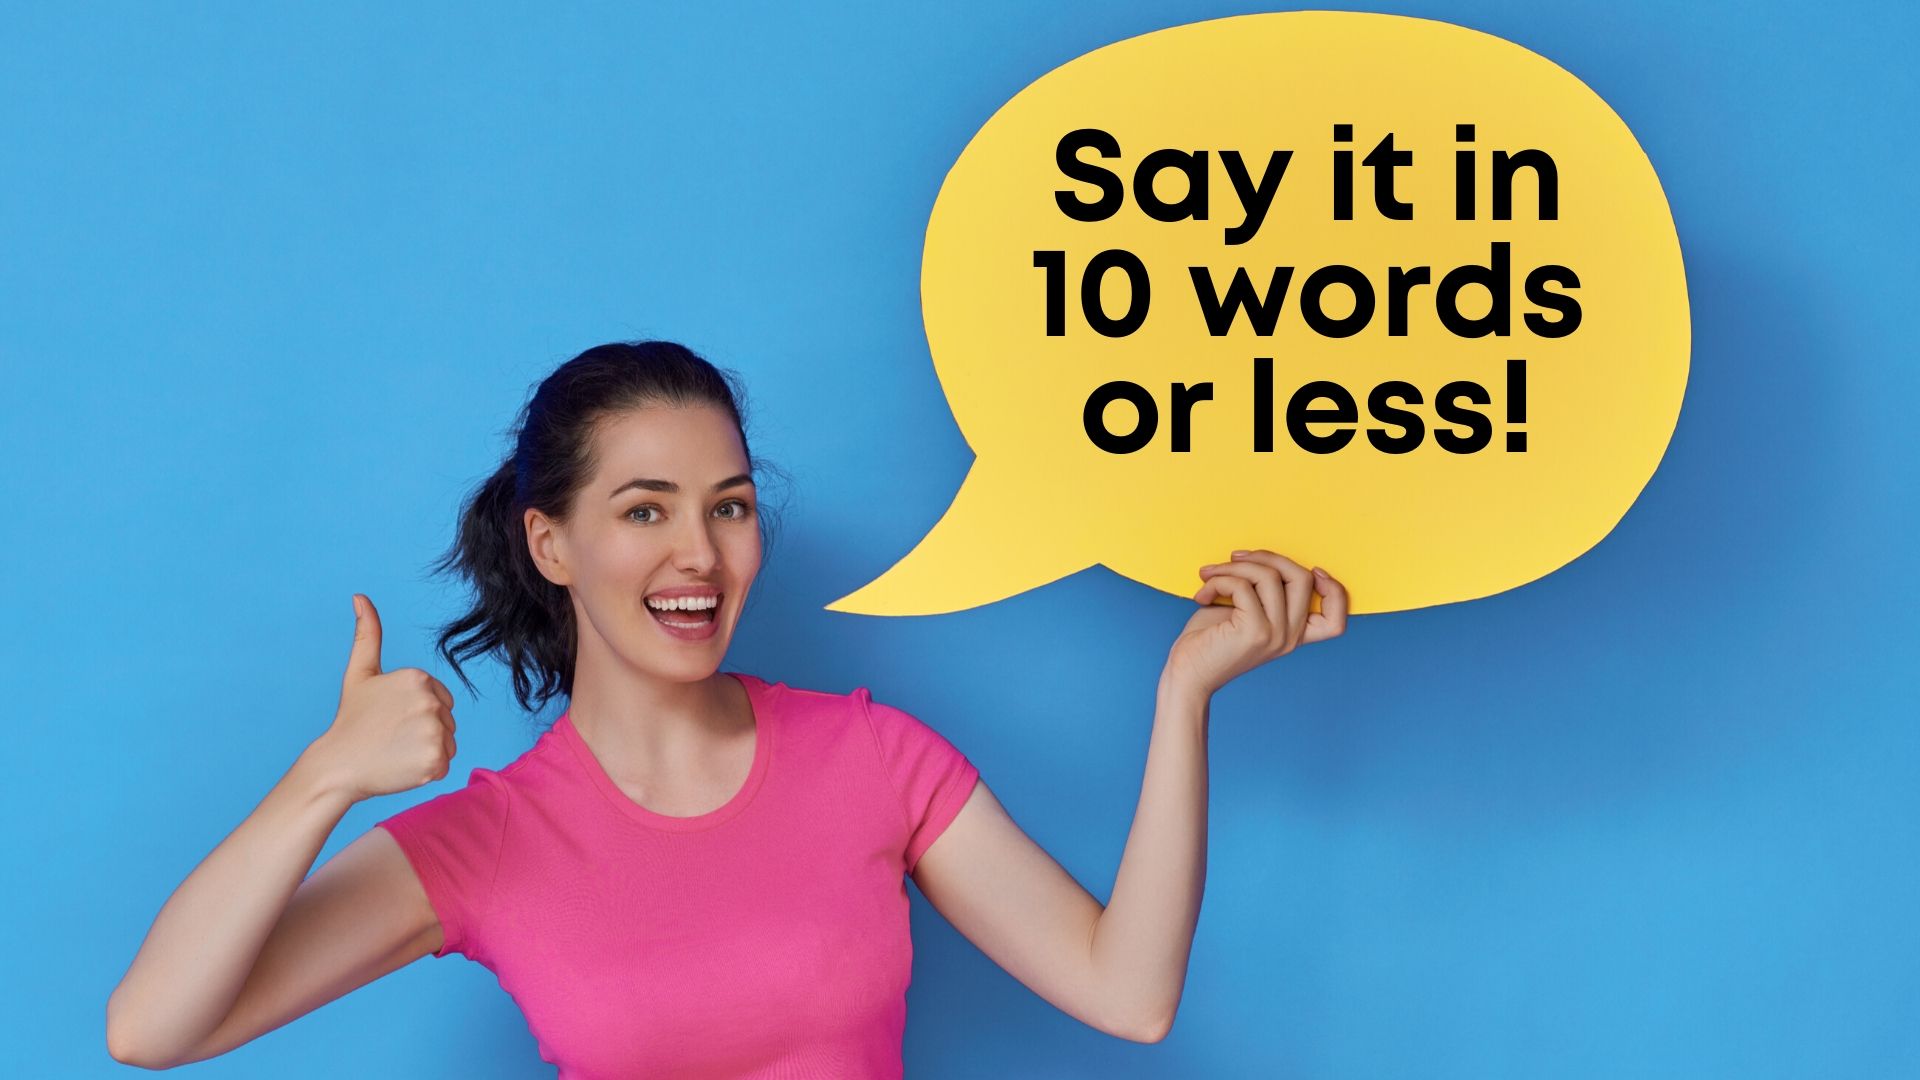 Say it in 10 words or less!